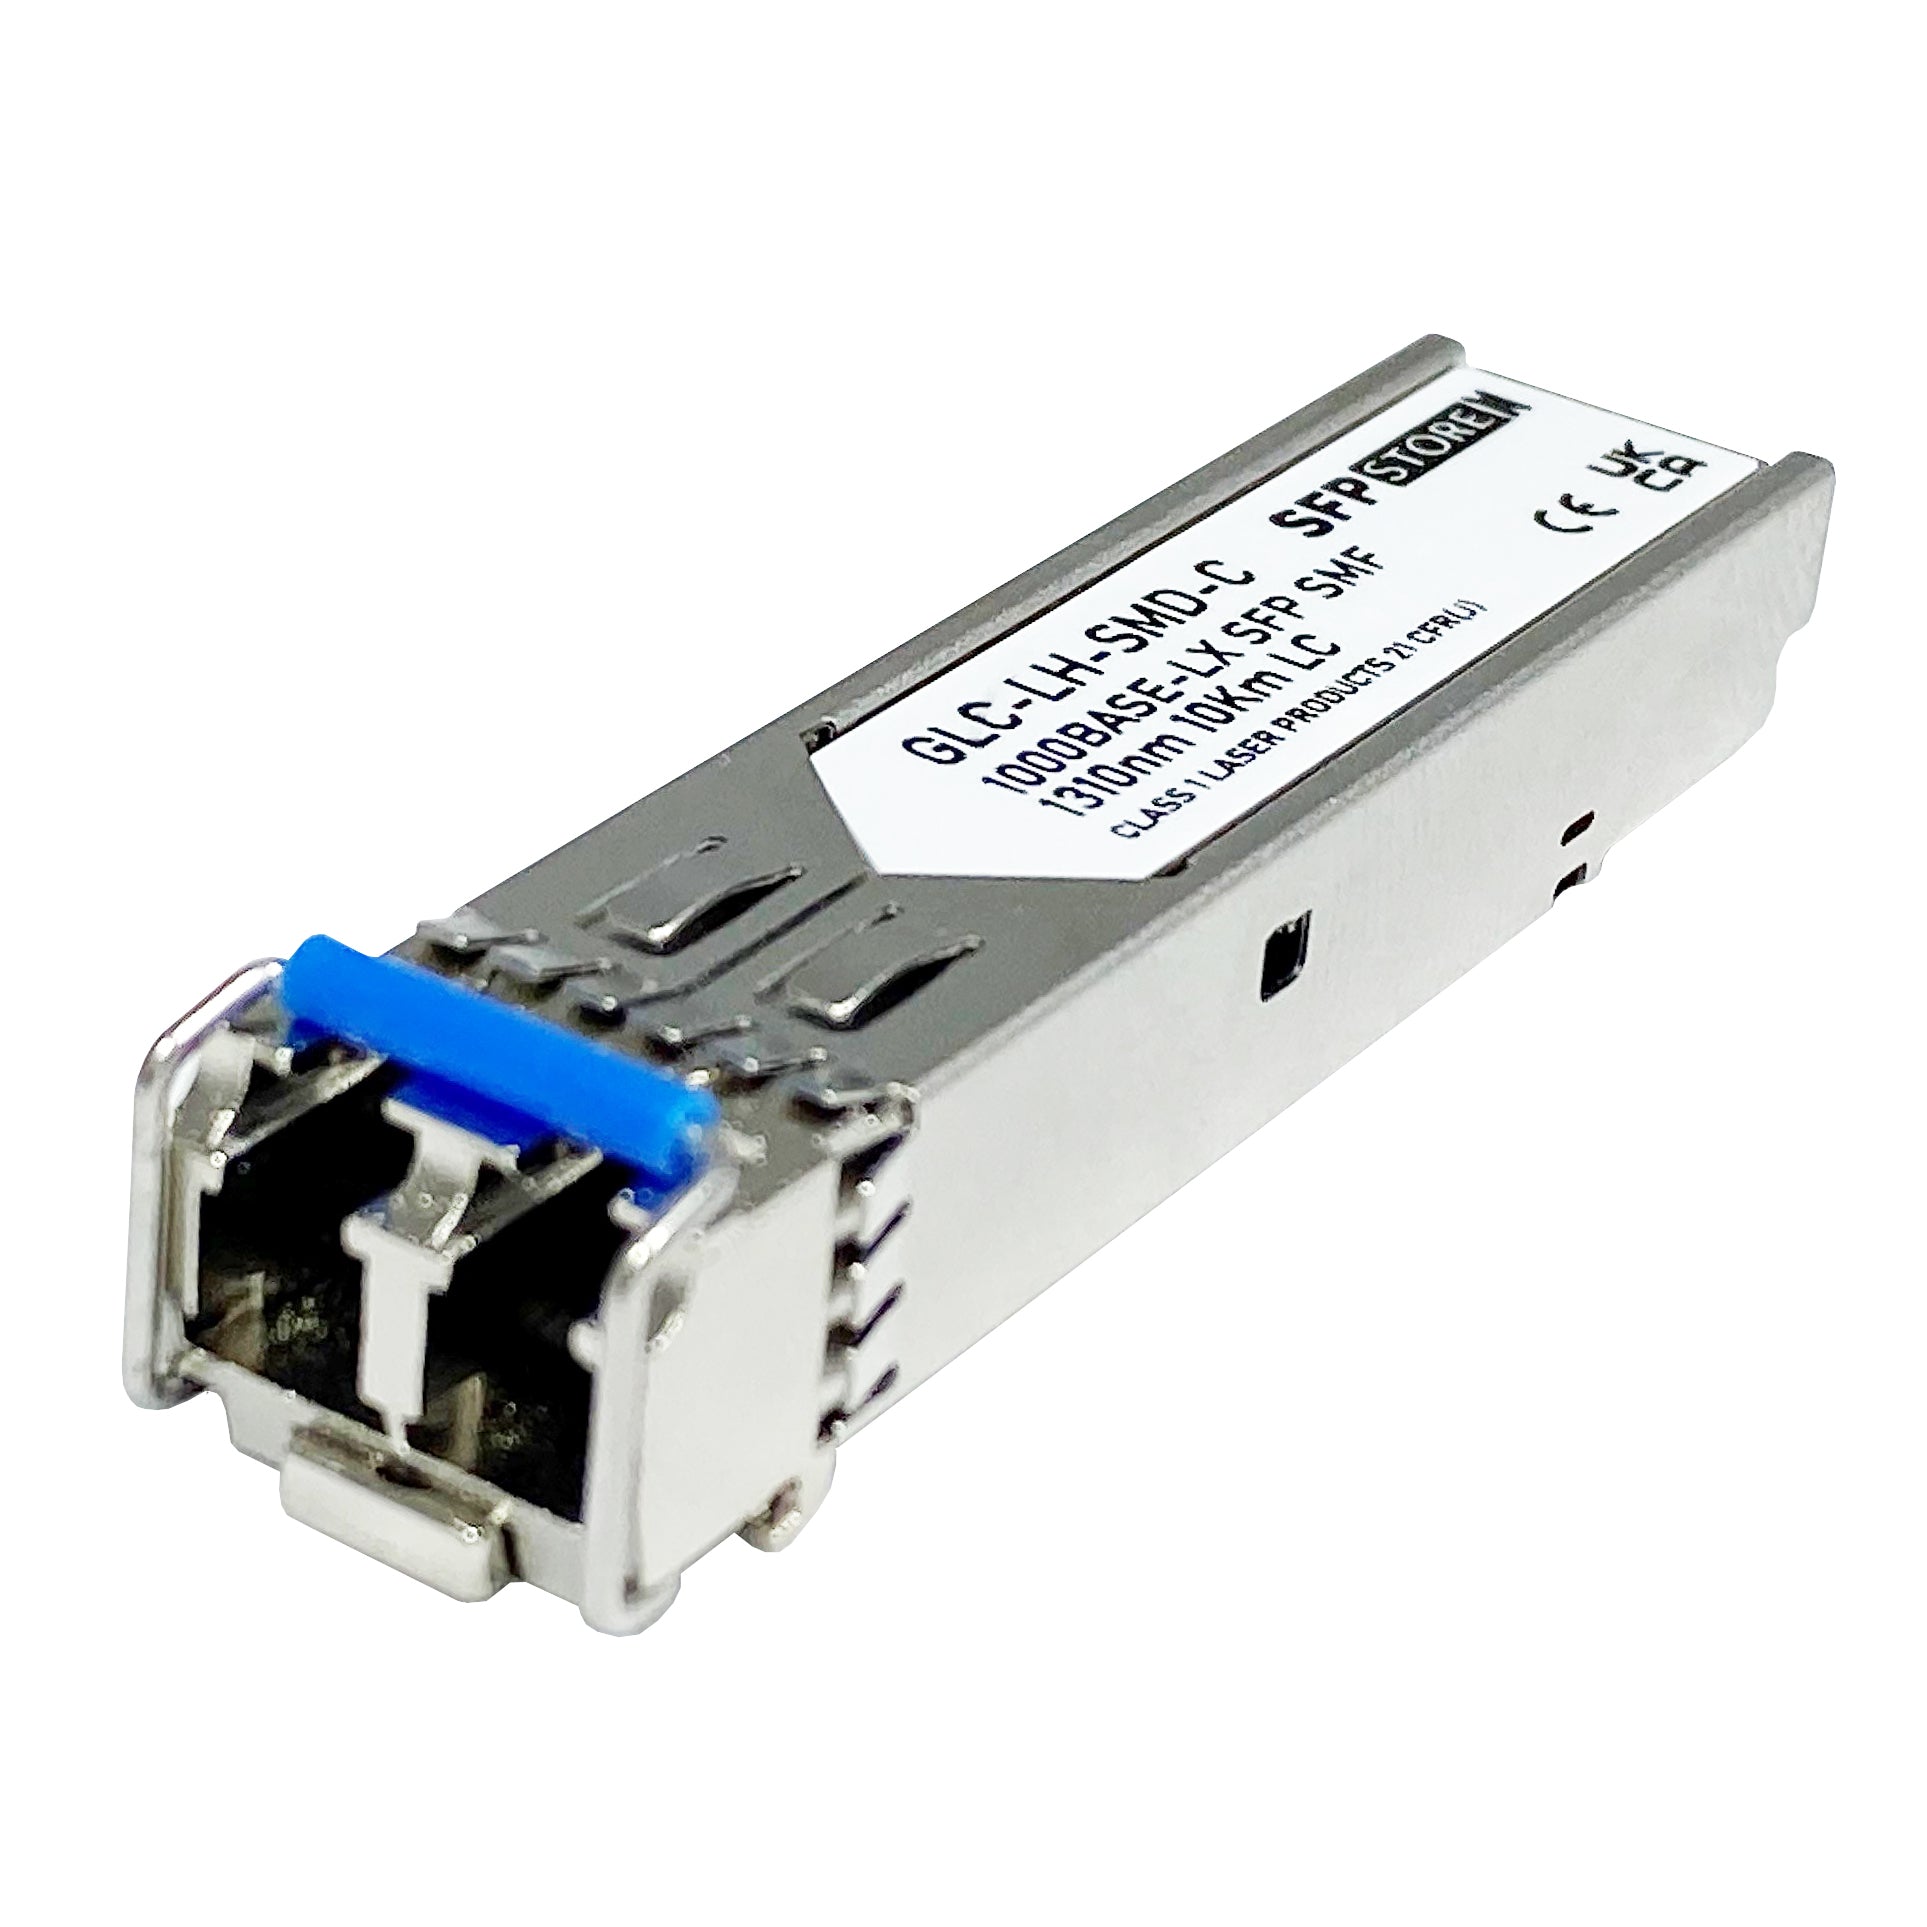 AT-SPLX10-C Allied Telesis Compatible 1G LX SFP LC Transceiver